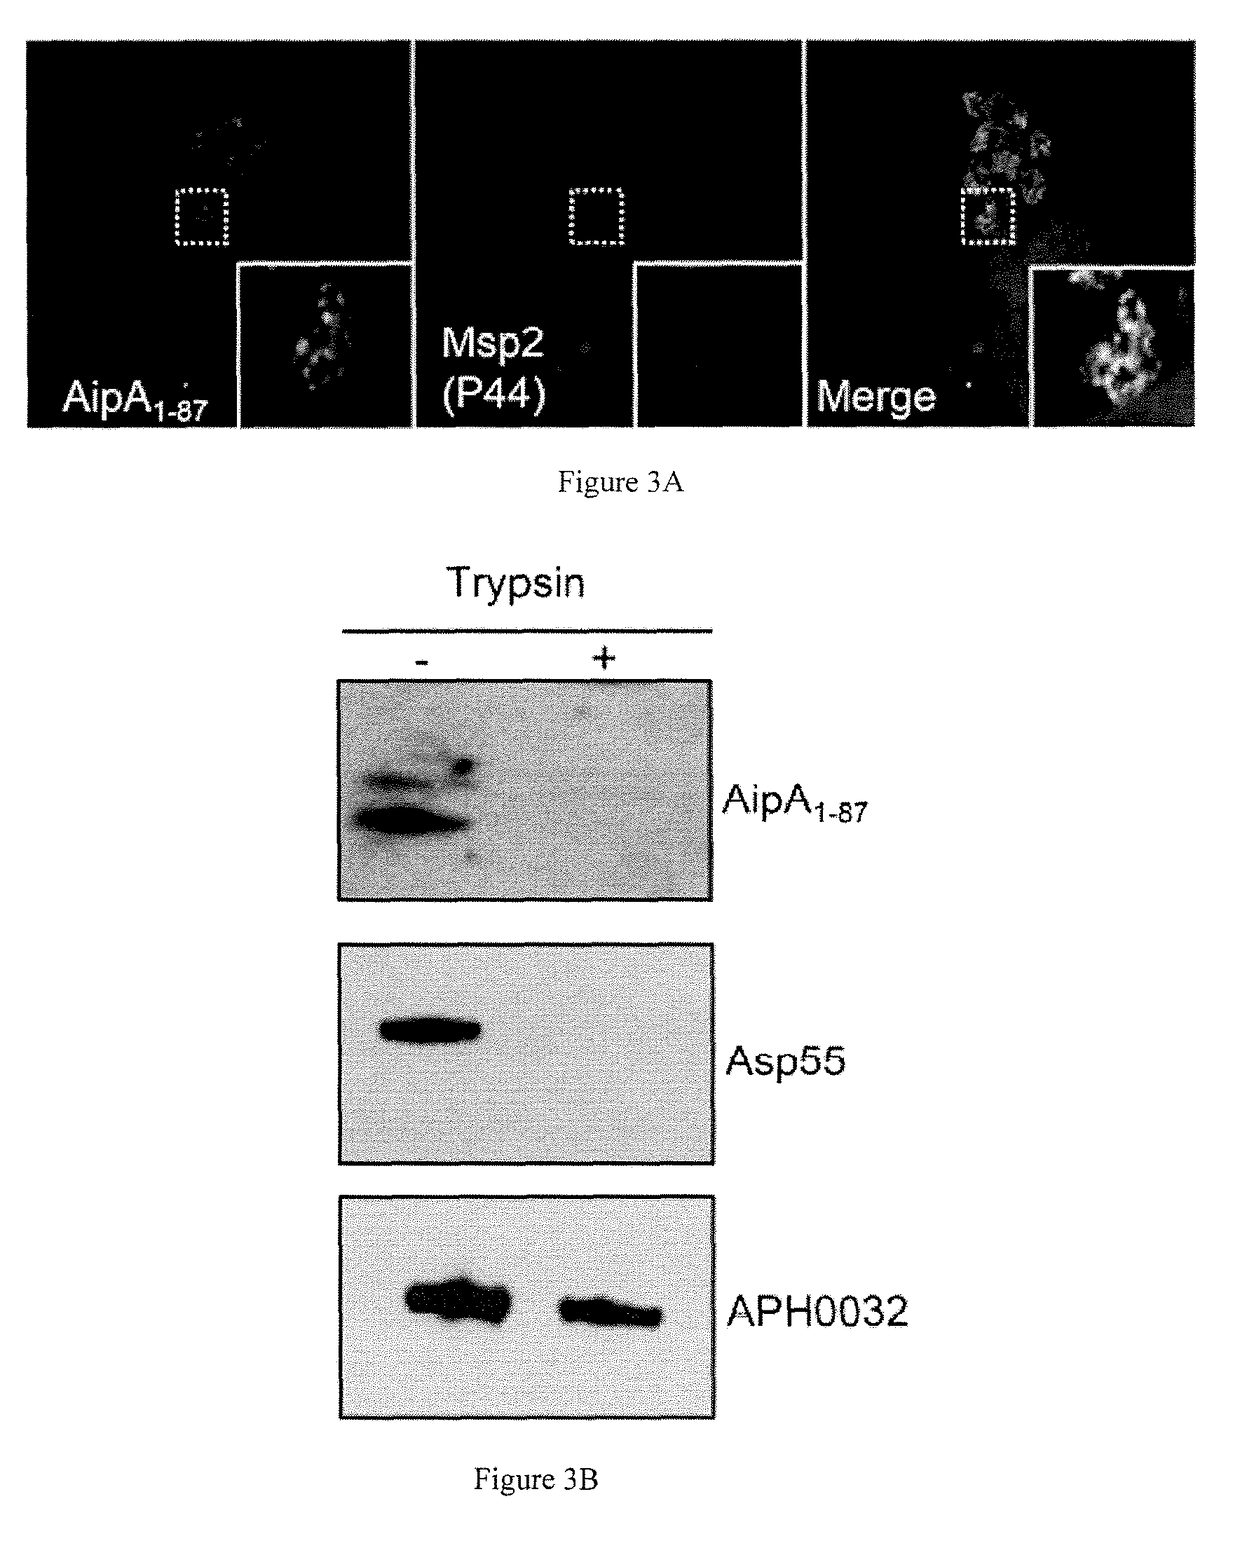 AIPA, OMPA, and ASP14 in vaccine compositions and diagnostic targets for anaplasma phagocytophilum infection